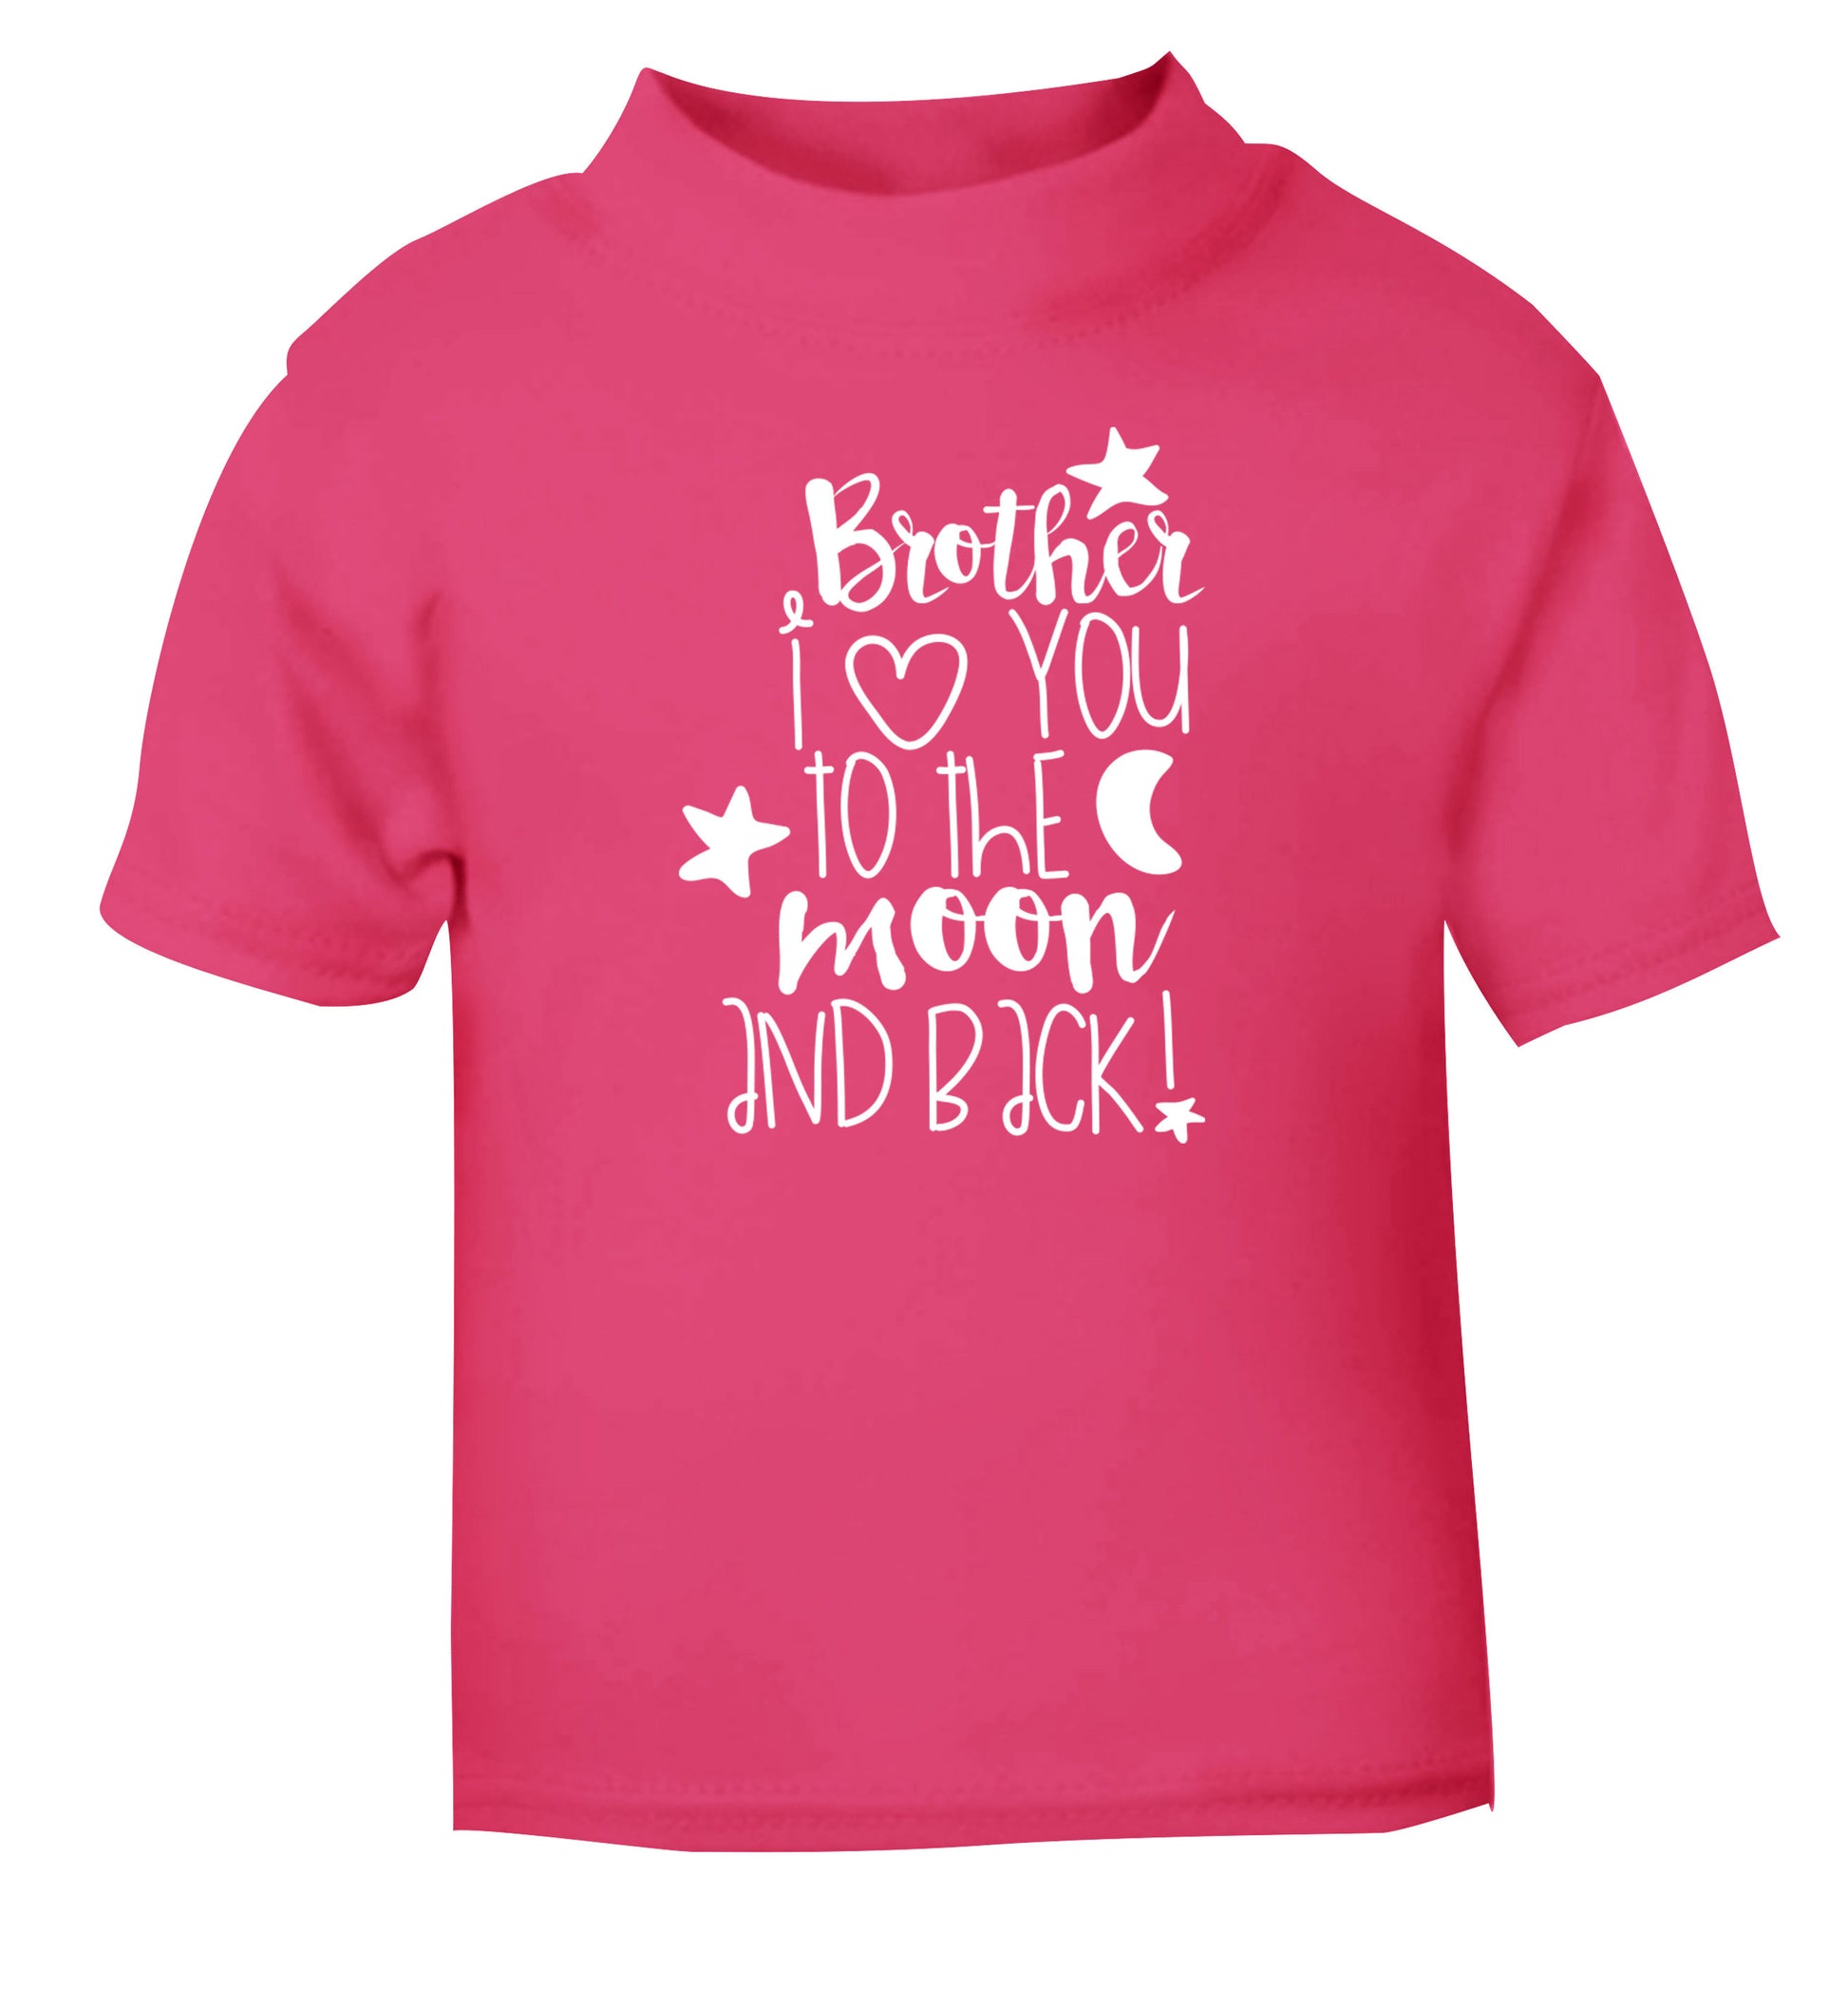 Brother I love you to the moon and back pink Baby Toddler Tshirt 2 Years